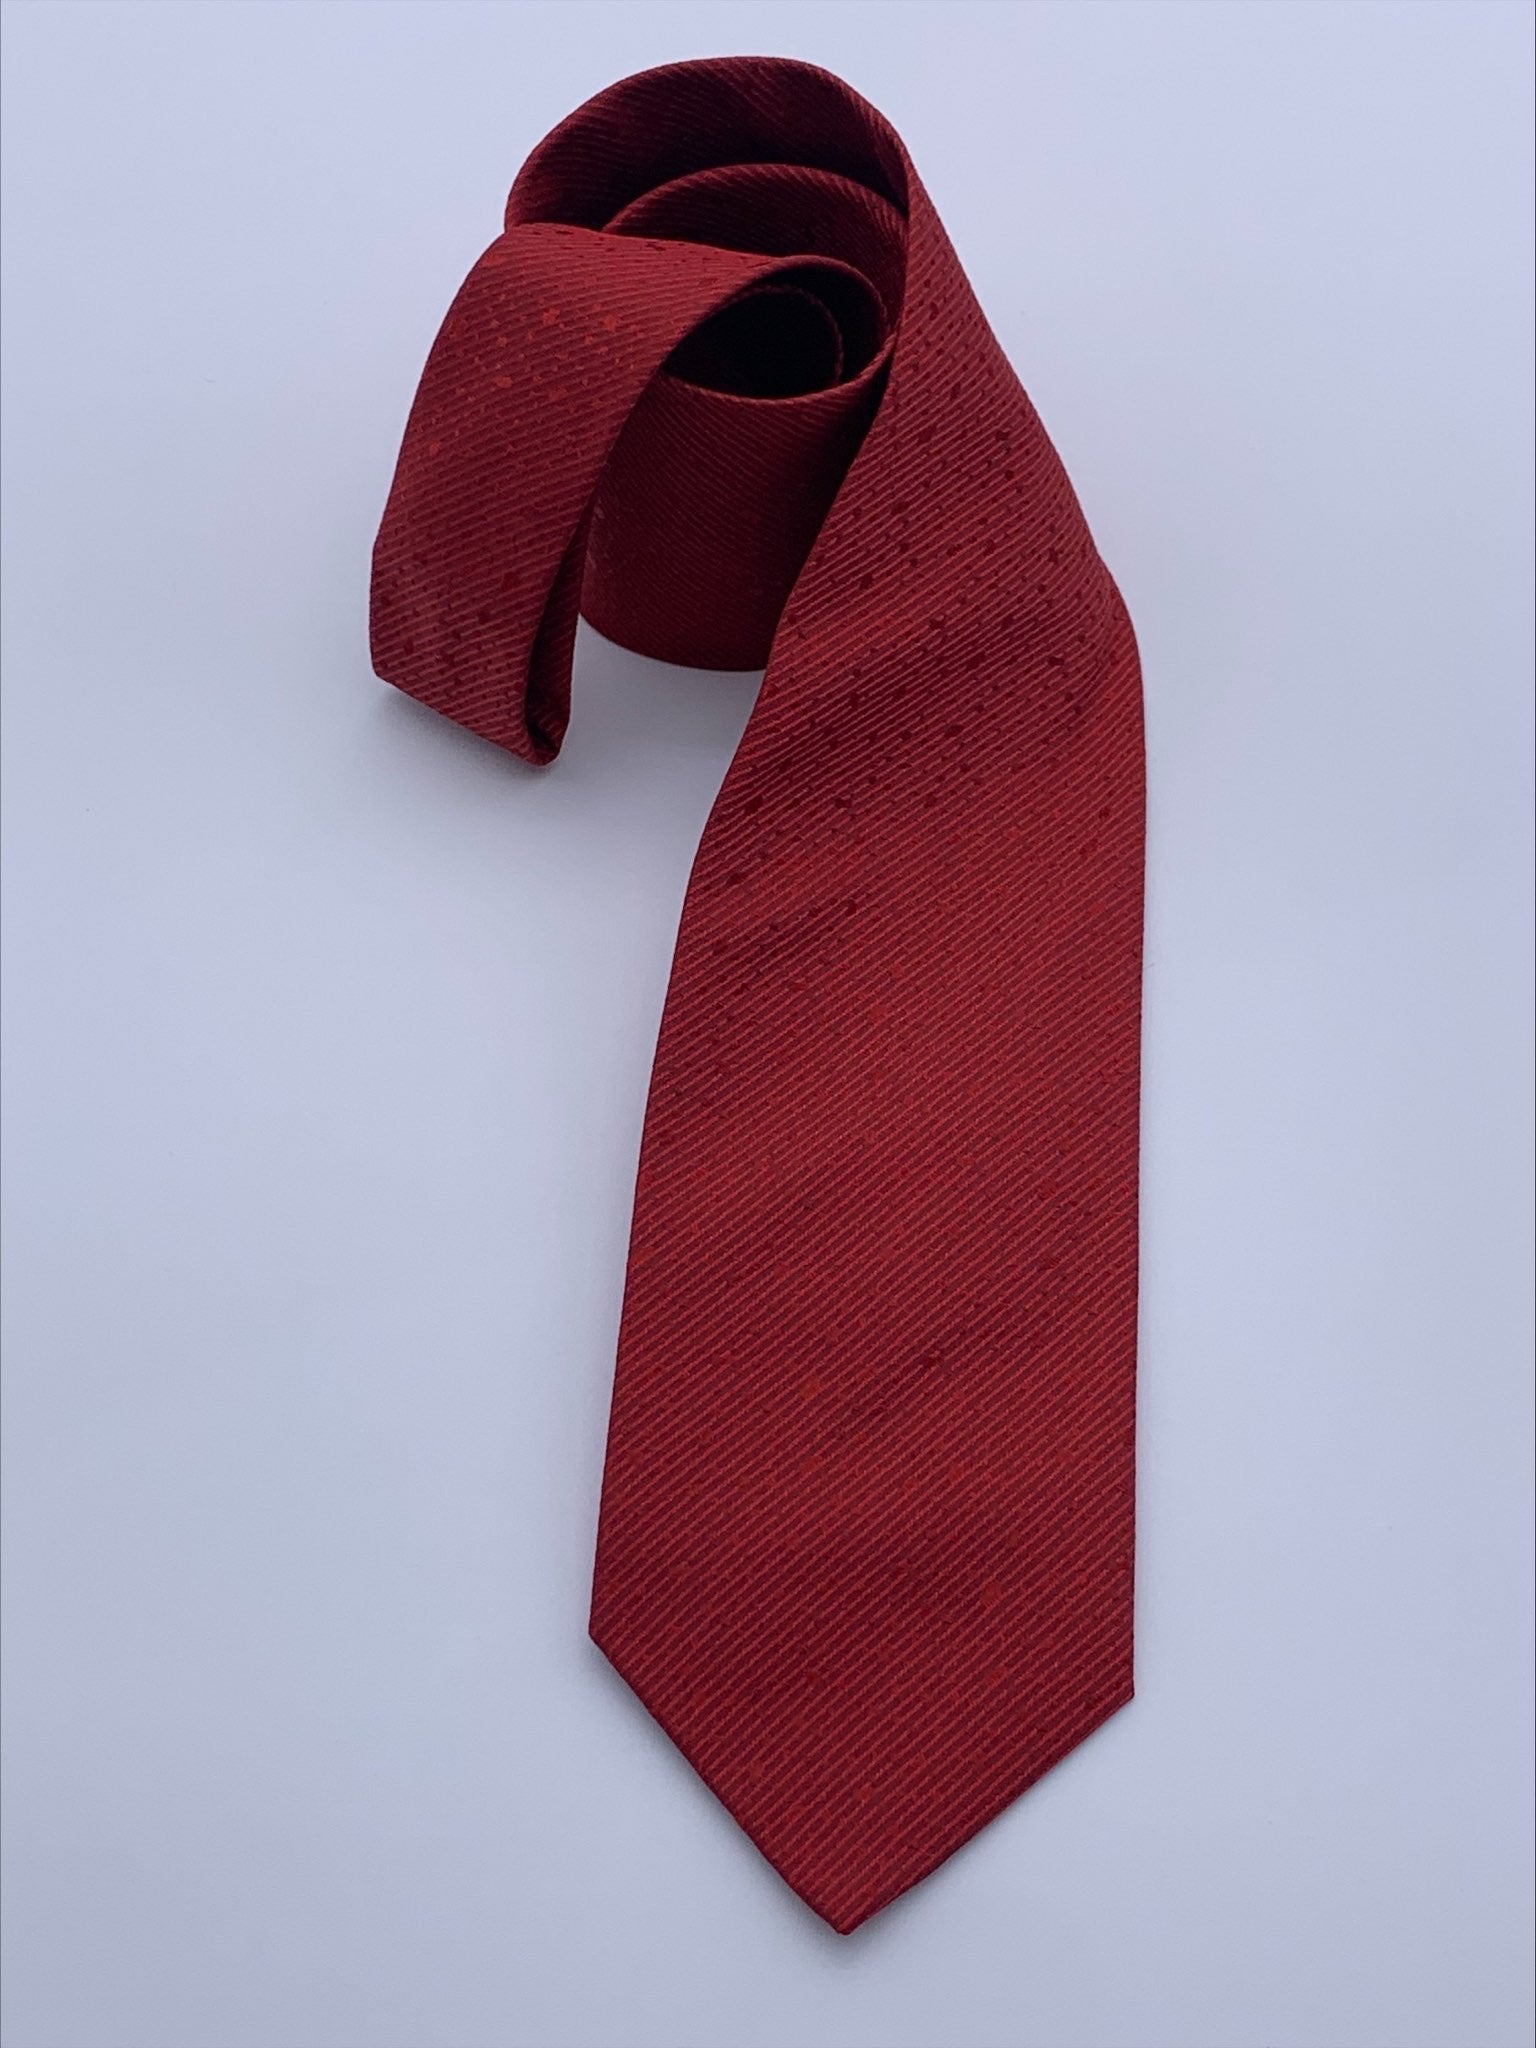 Pure silk three fold tie.Handmade by our Italian tailors.100% Pure silk.Our ties standard width is 8 cm (3.15 inch), standard length is 150 cm (59 inch) |Sartoria Dei Duchi-Atri